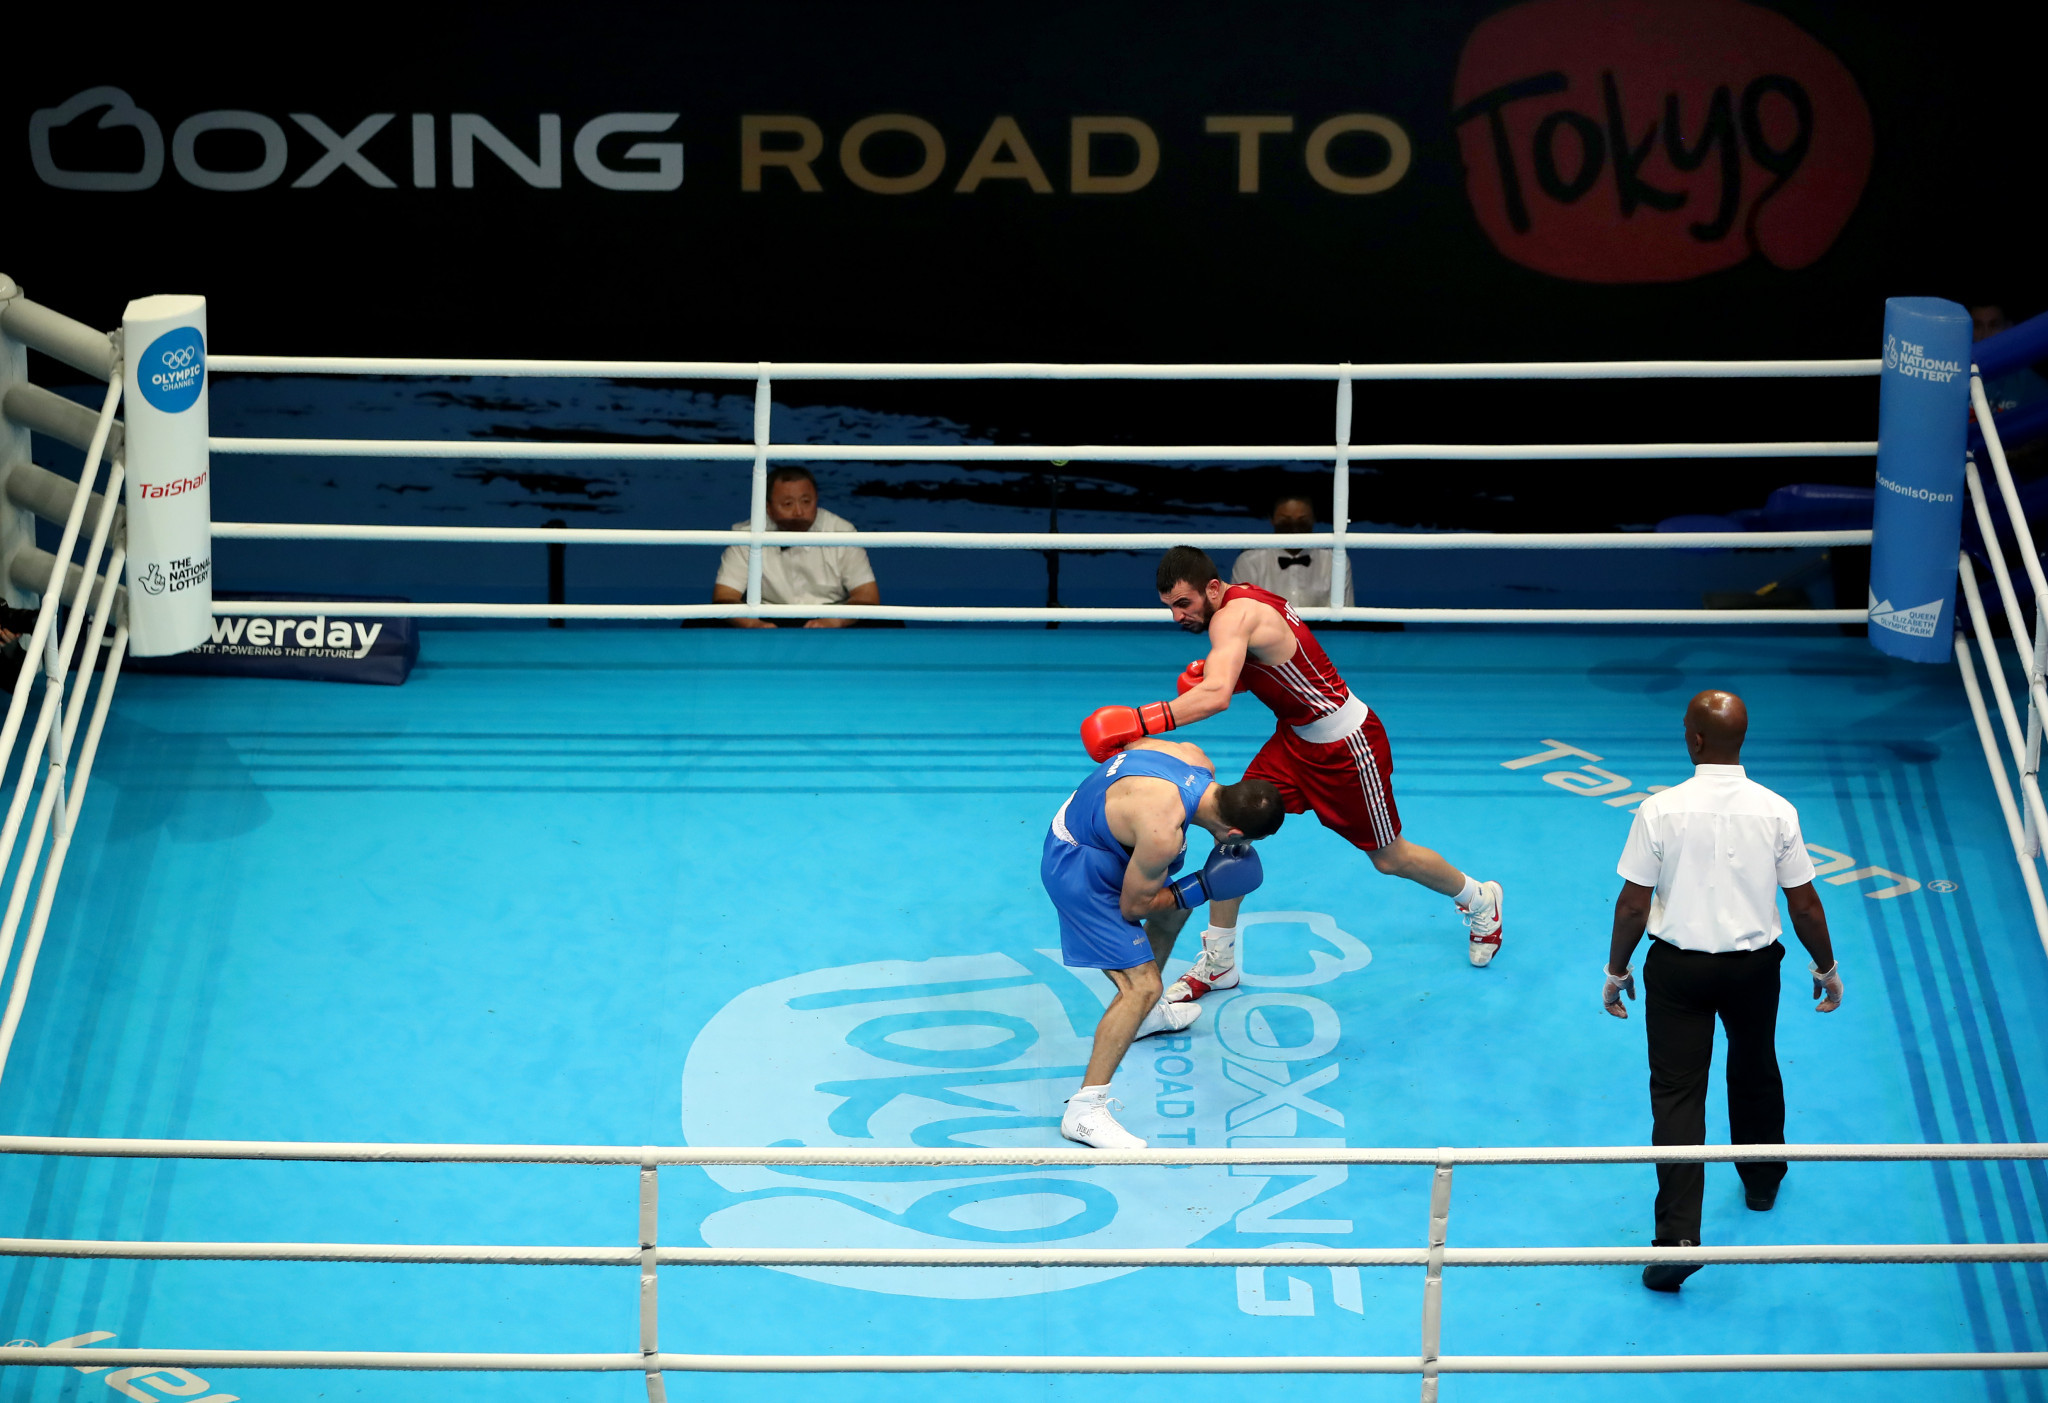 European Olympic boxing qualifying tournament set to resume in London in April 2021